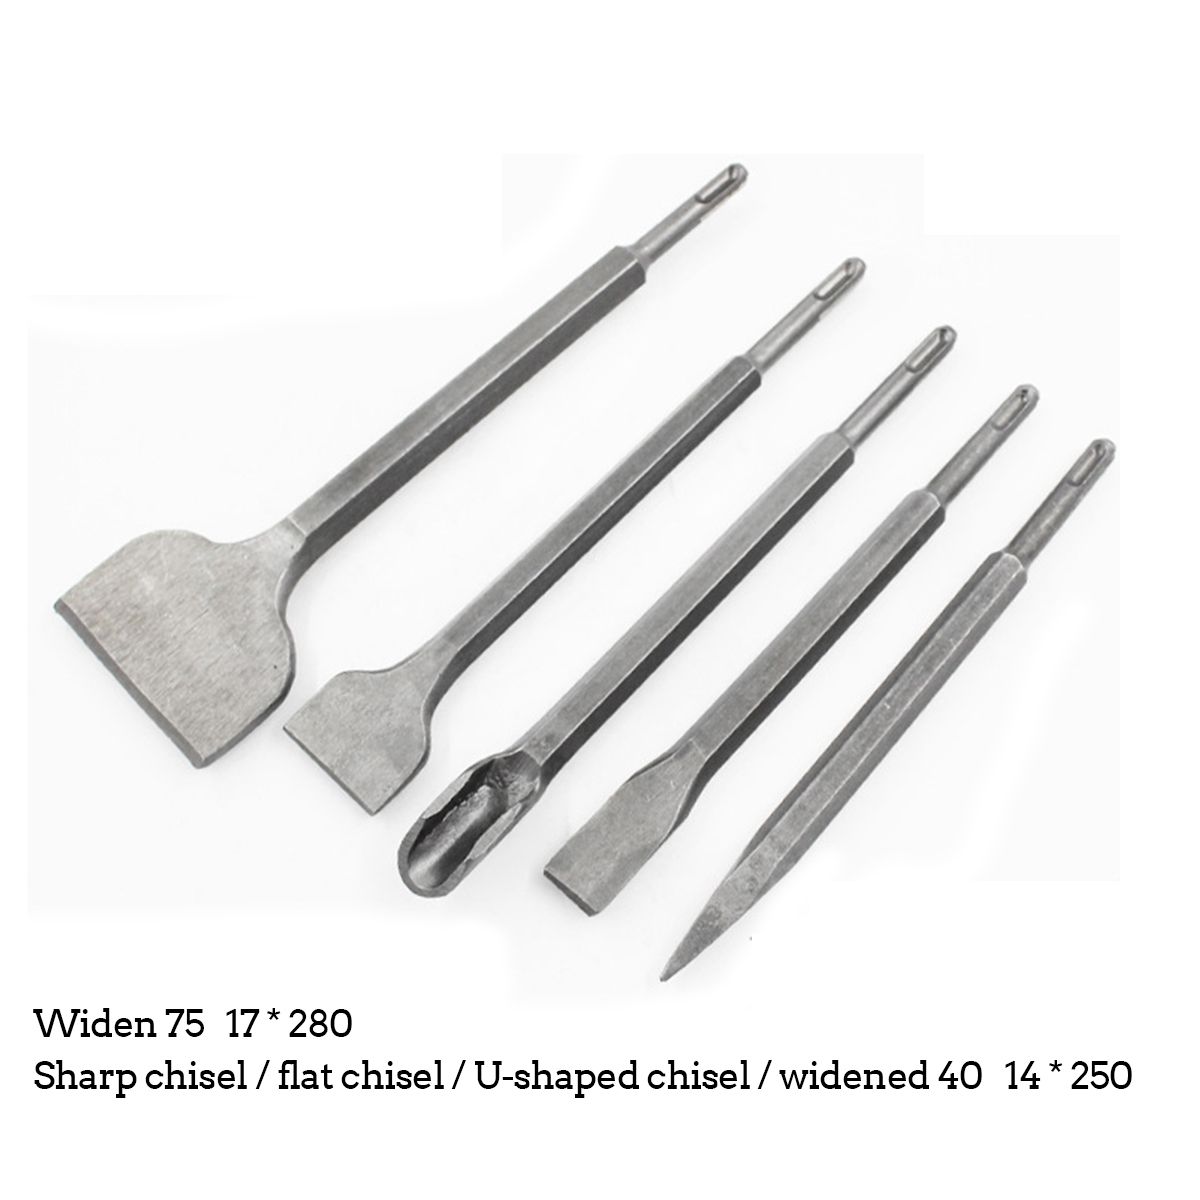 Electric-Hammer-Chisel-Rotary-Bits-Set-Fit-for-Concrete-Hydropower-Drill-Tool-1691778